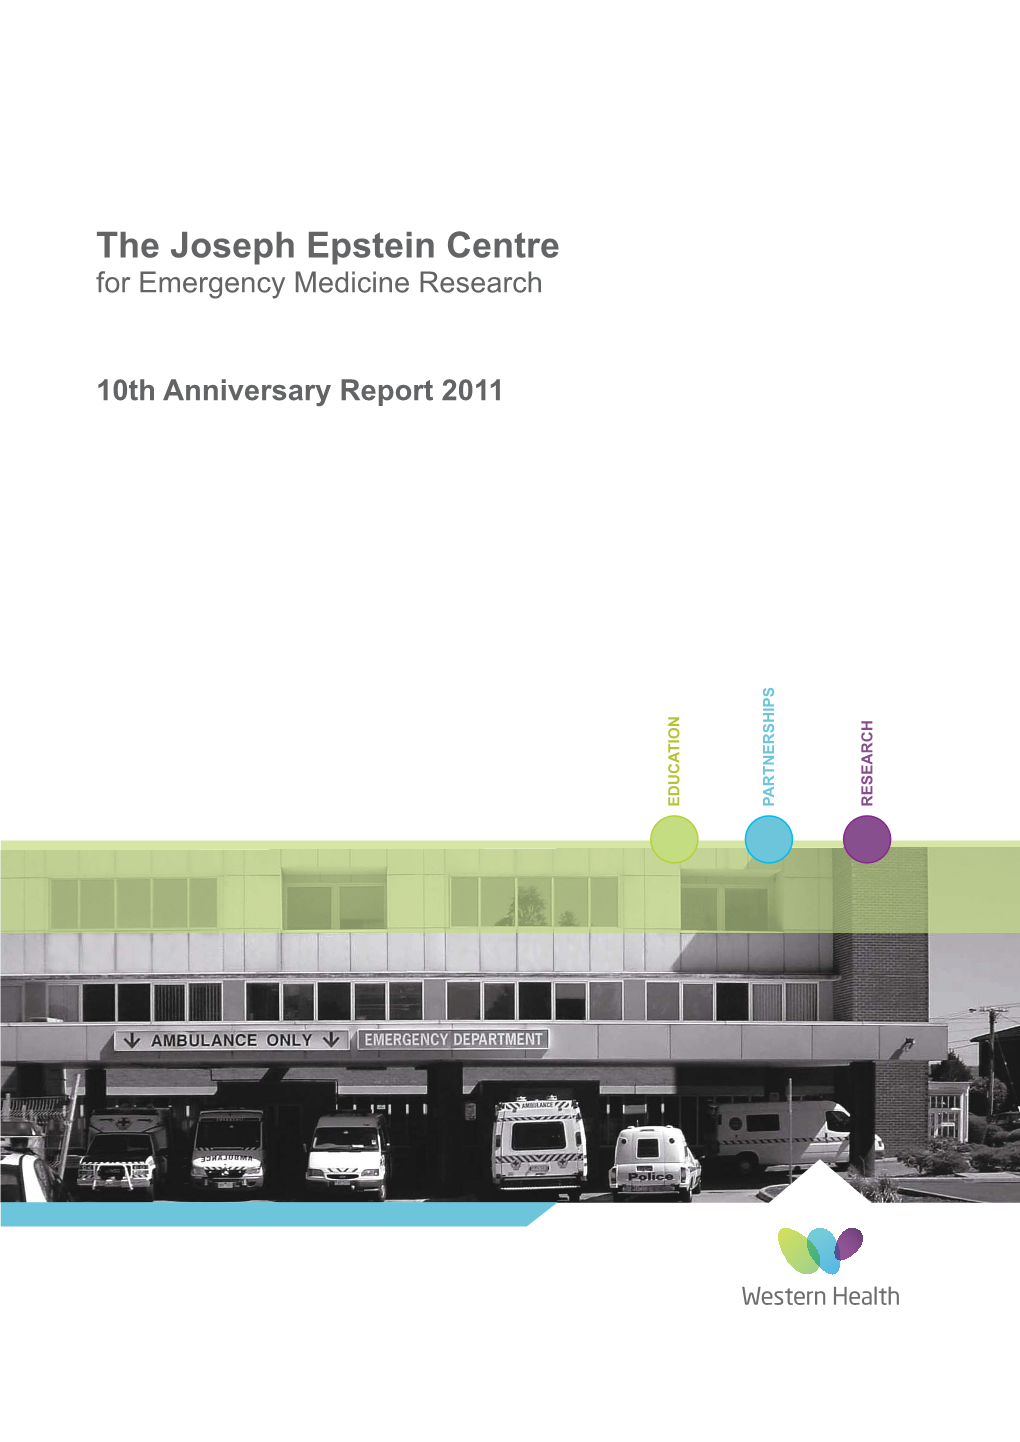 The Joseph Epstein Centre for Emergency Medicine Research